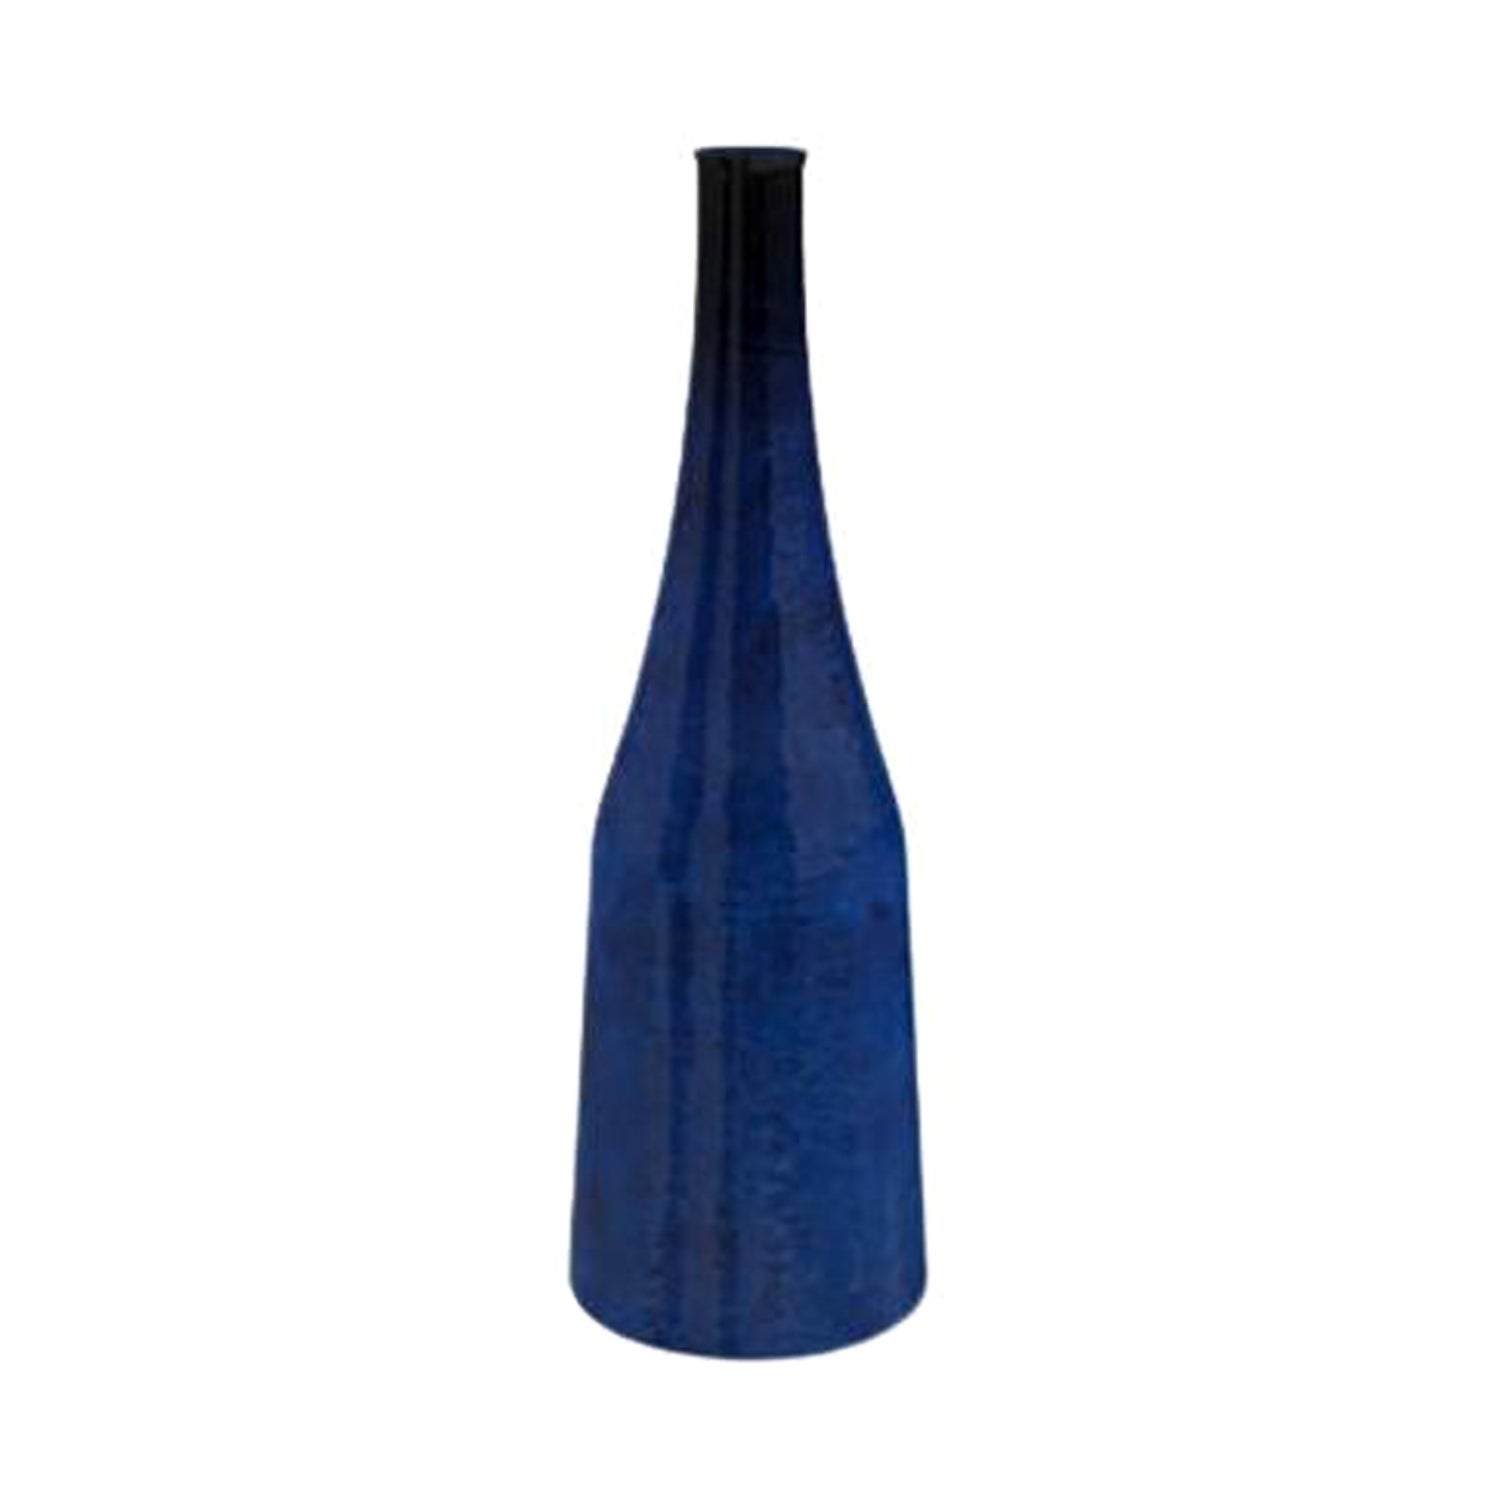 Paola Navone Vases and Vessels - 11 For Sale at 1stDibs